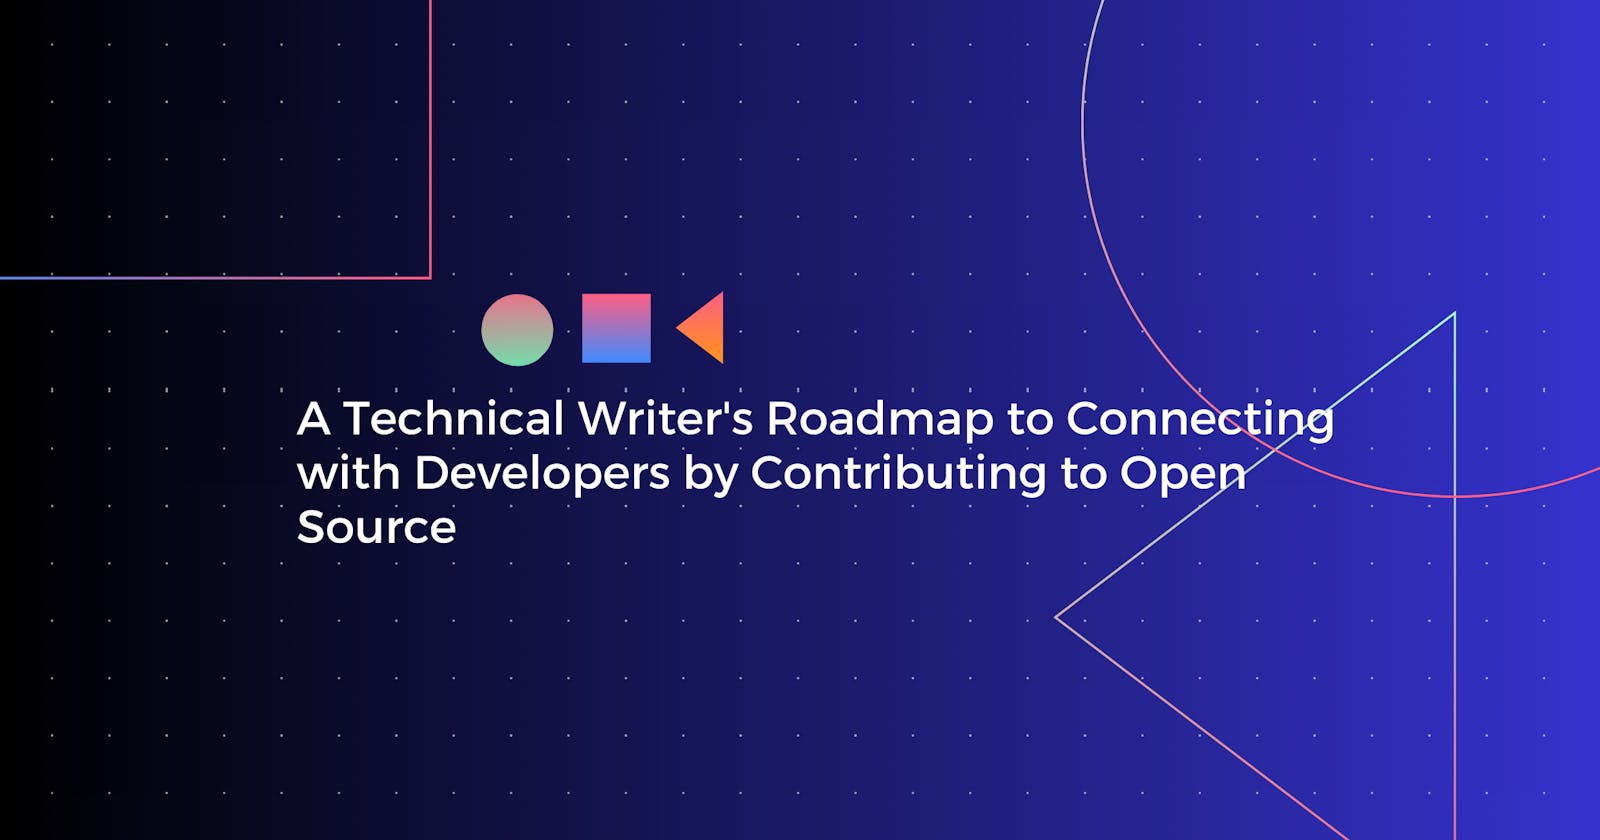 A Technical Writer's Roadmap to Connecting with Developers by Contributing to Open Source